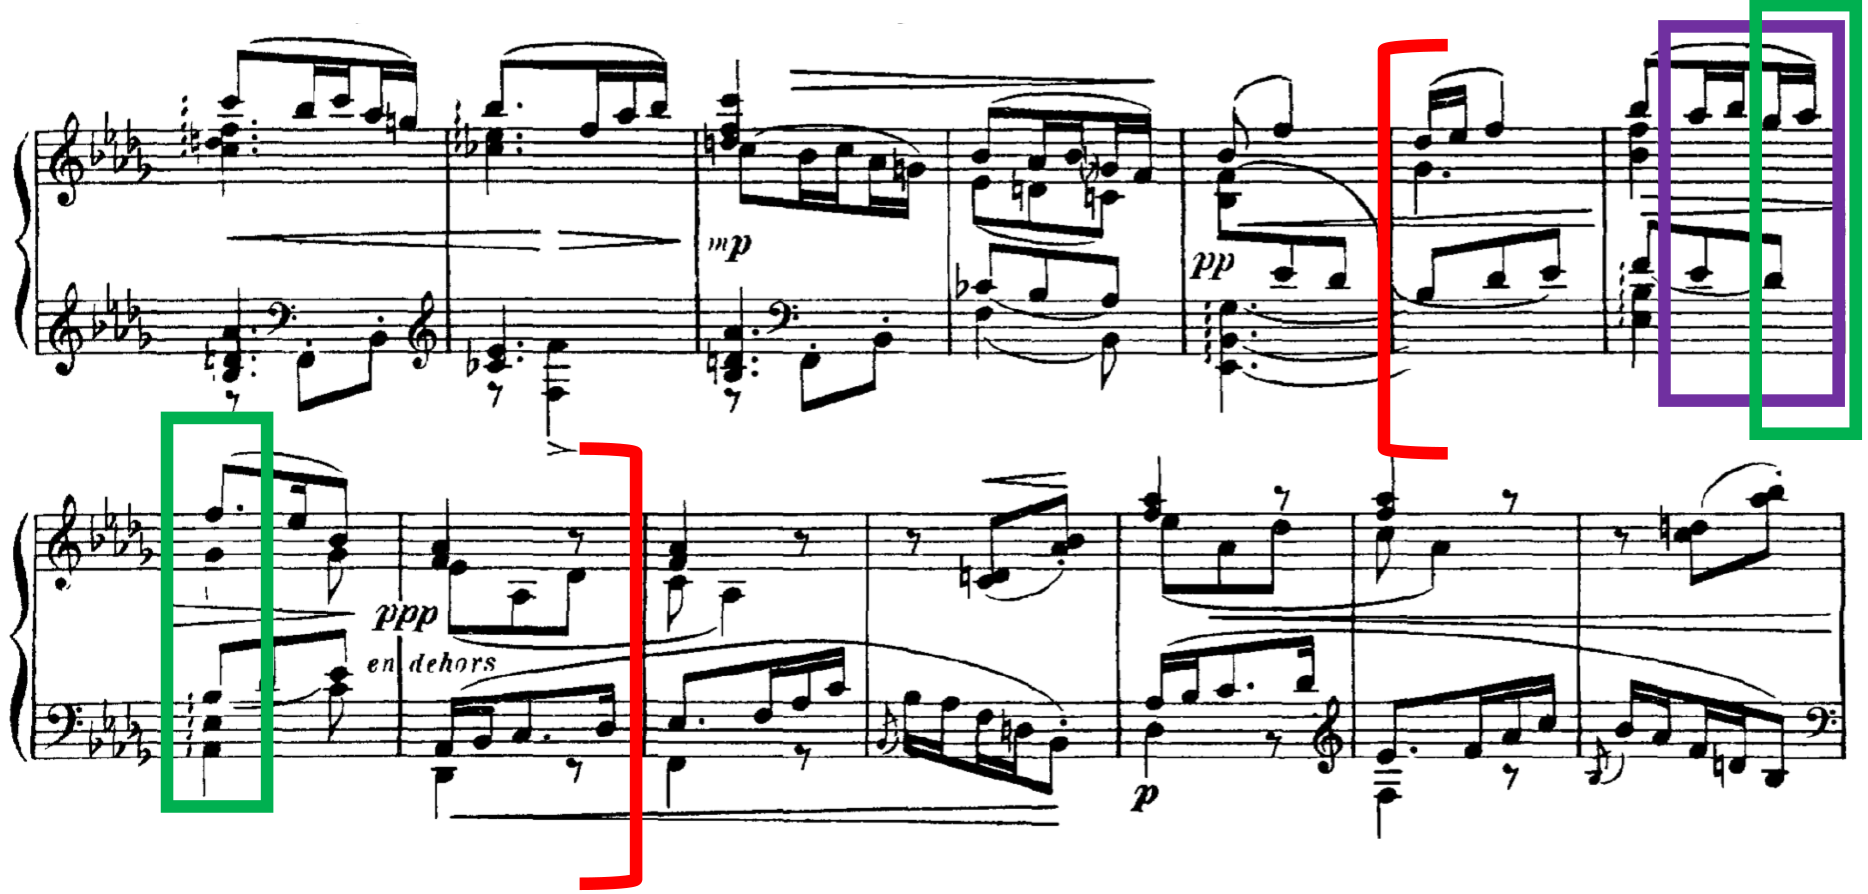 Two sets of staves containing a treble and bass clef. A portion of music is specifically identified within the staves. More in description below.